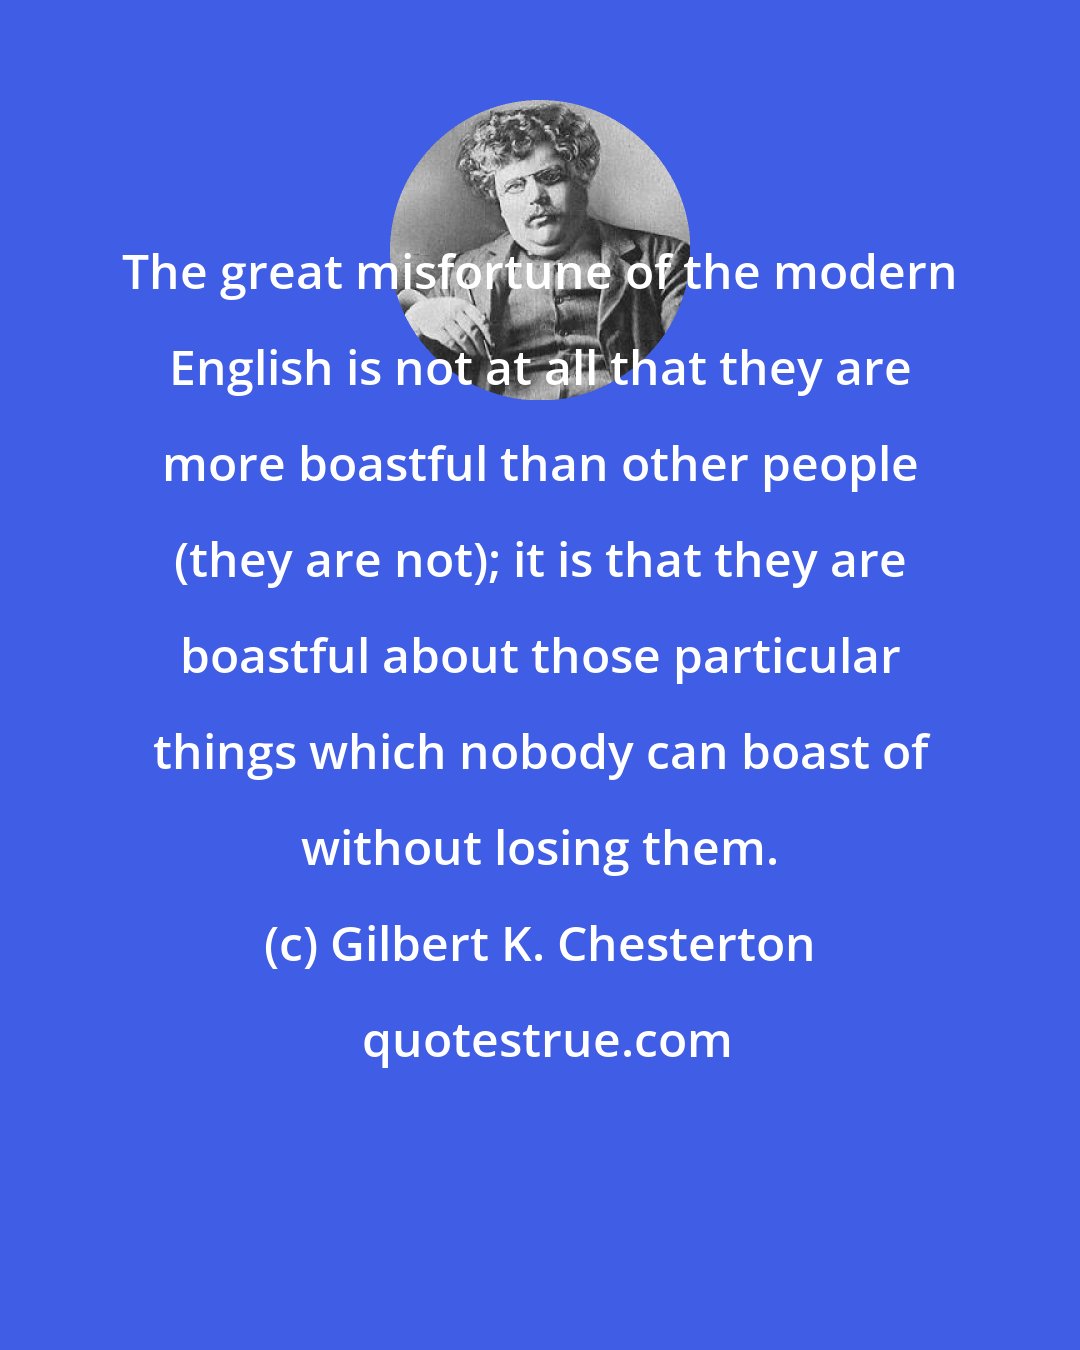 Gilbert K. Chesterton: The great misfortune of the modern English is not at all that they are more boastful than other people (they are not); it is that they are boastful about those particular things which nobody can boast of without losing them.